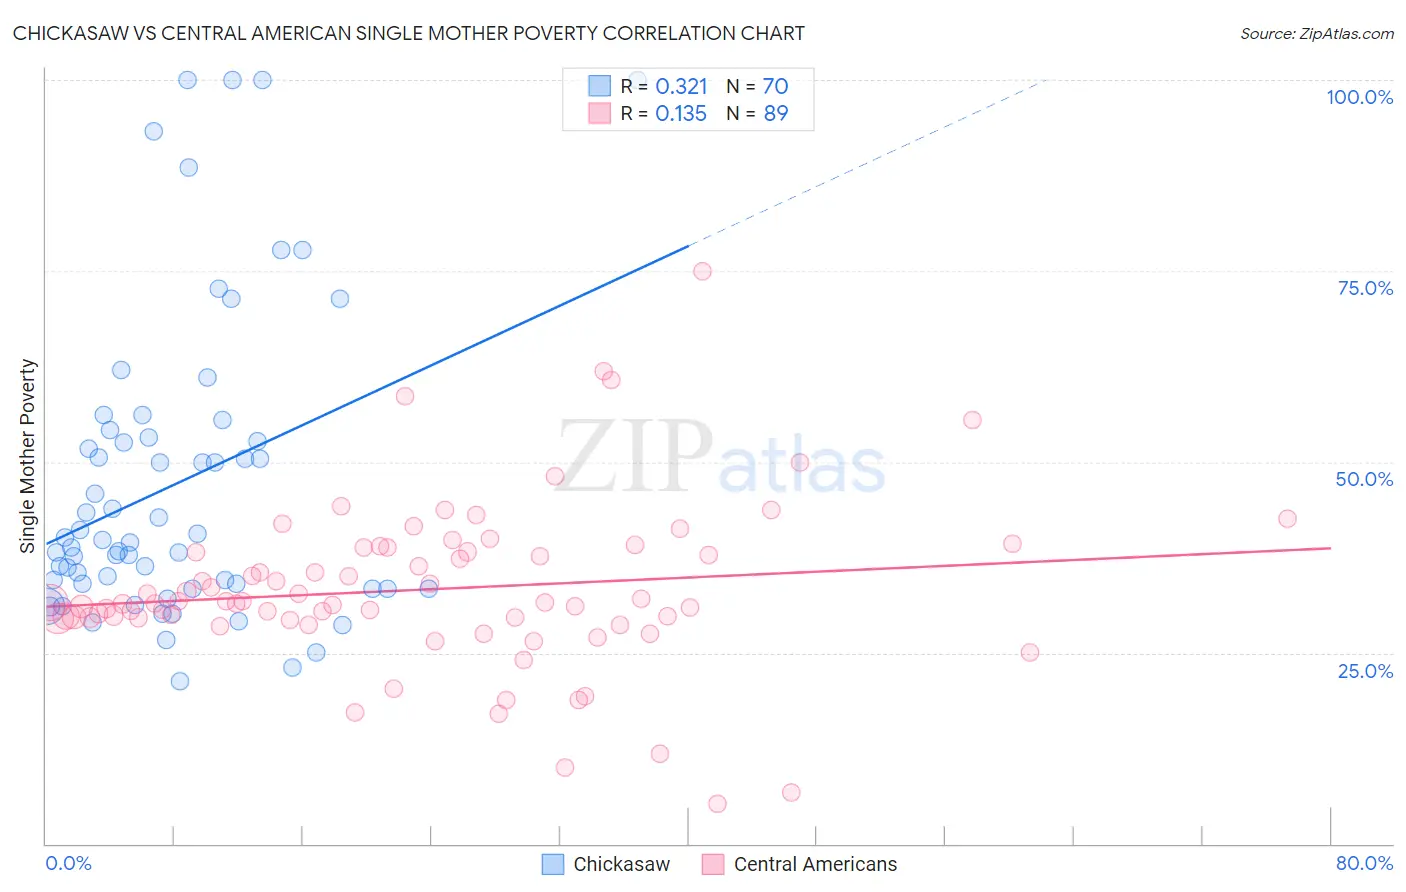 Chickasaw vs Central American Single Mother Poverty